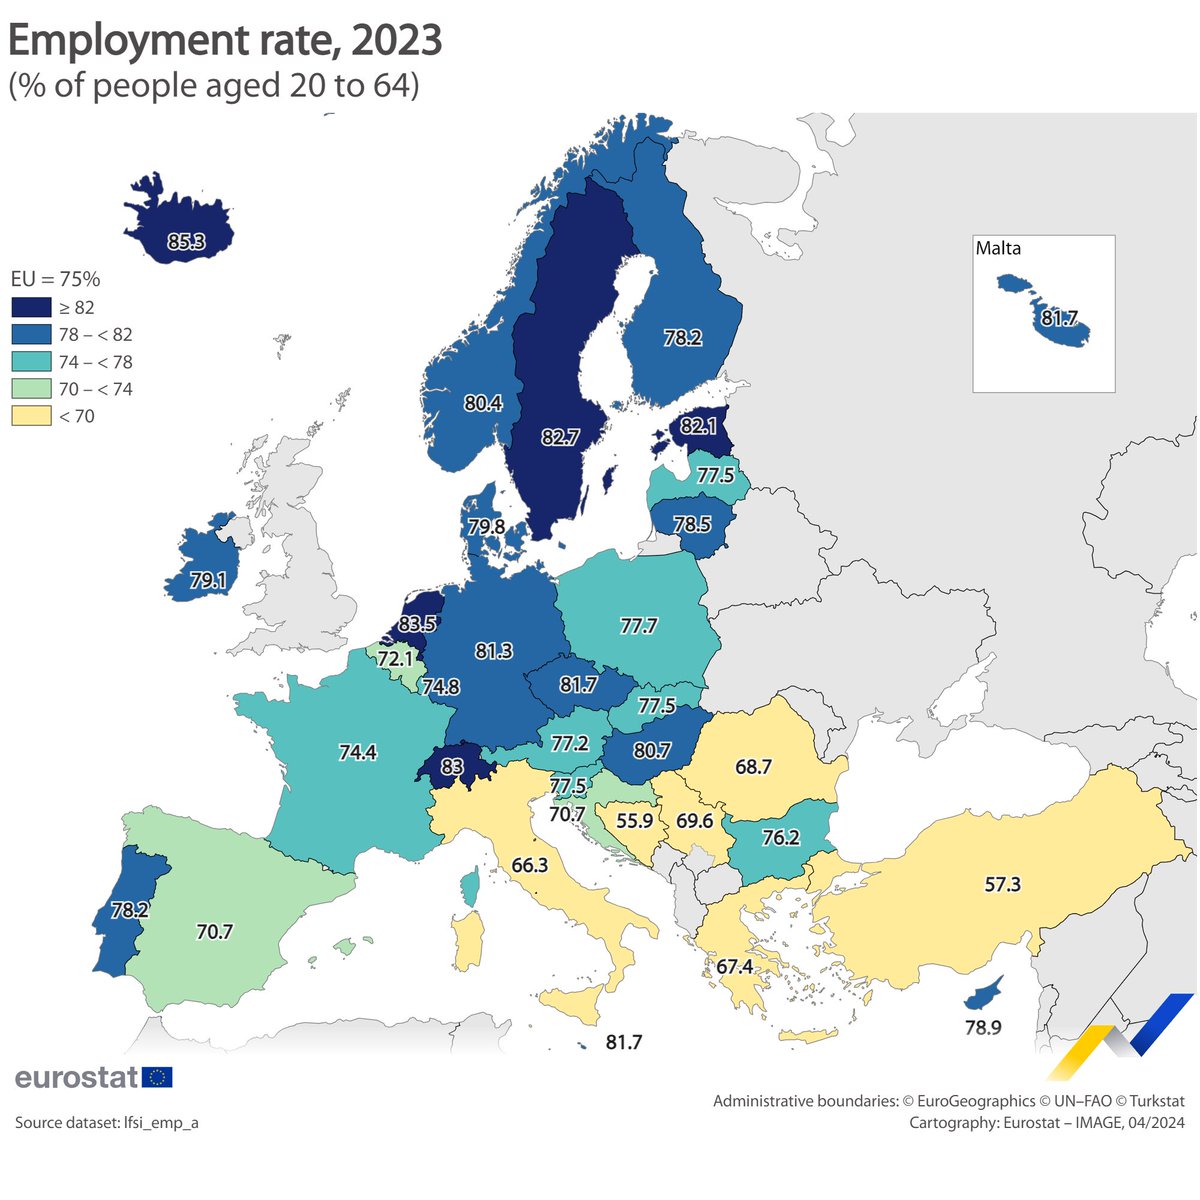 In 2023, more than 75% (195.3 million) of the EU's 20 to 64-year-olds were employed. This is great progress towards our target of at least 78% employment by 2030. Our focus remains on upskilling for job transitions and improving working conditions. europa.eu/!kncTWh